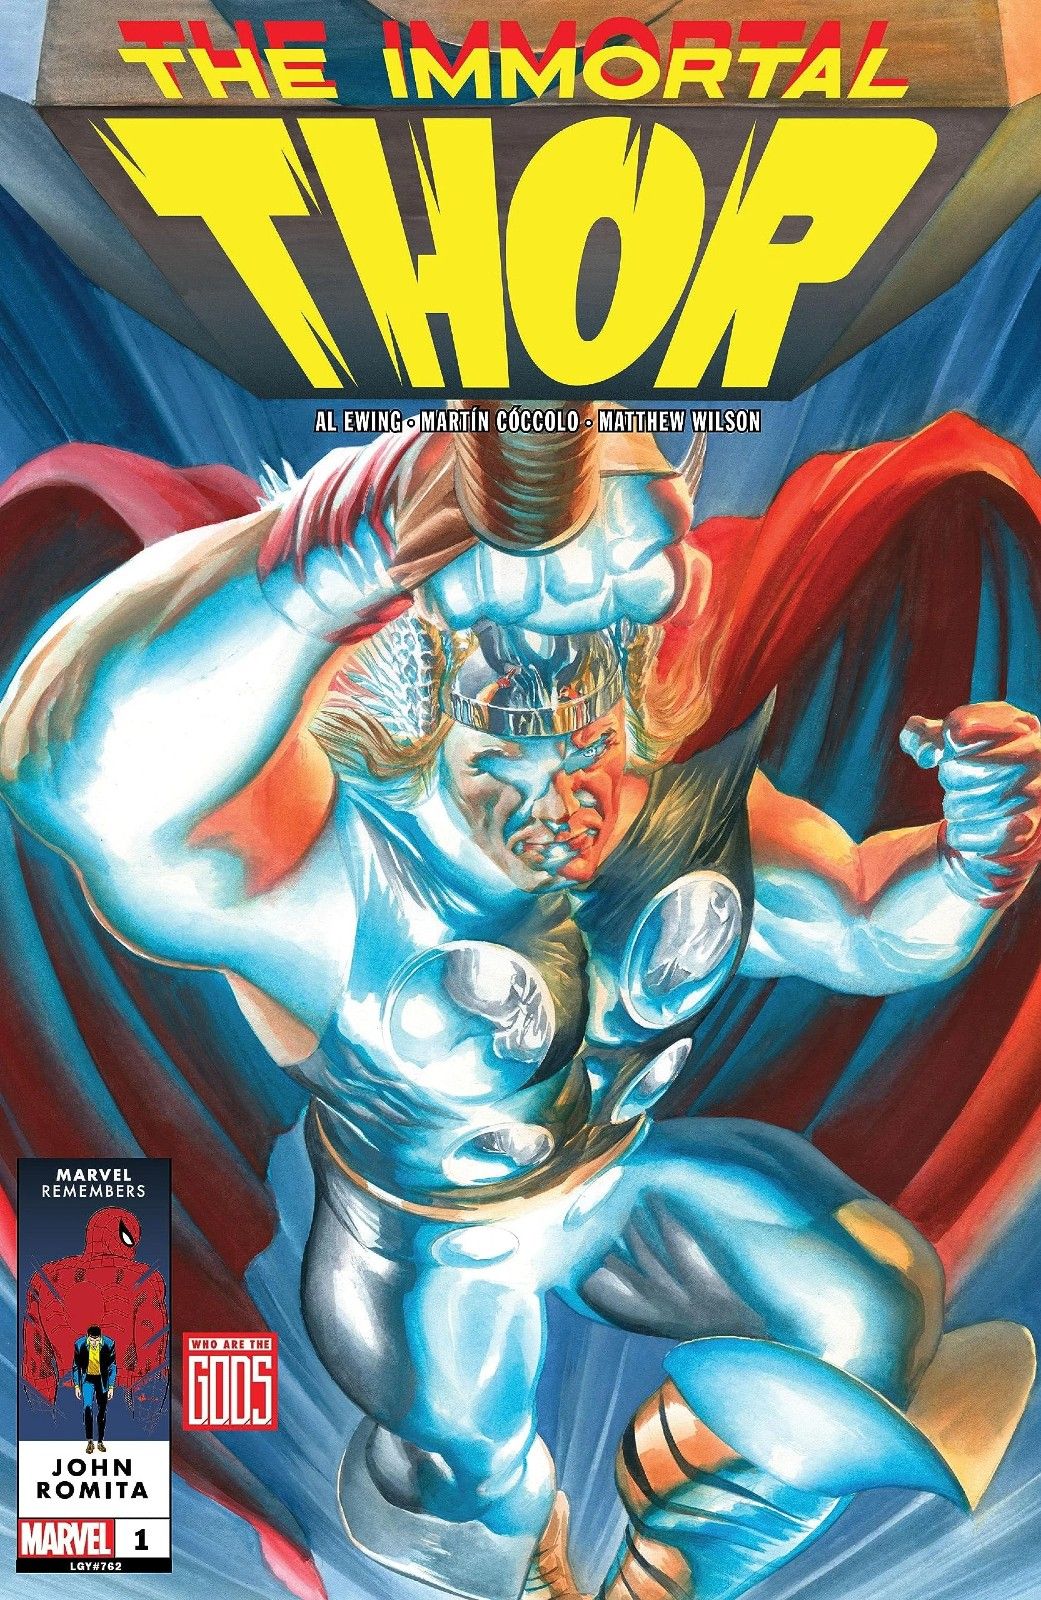 A stylized version of Thor flying with Mjolnir in Immortal Thor #1 by Marvel Comics